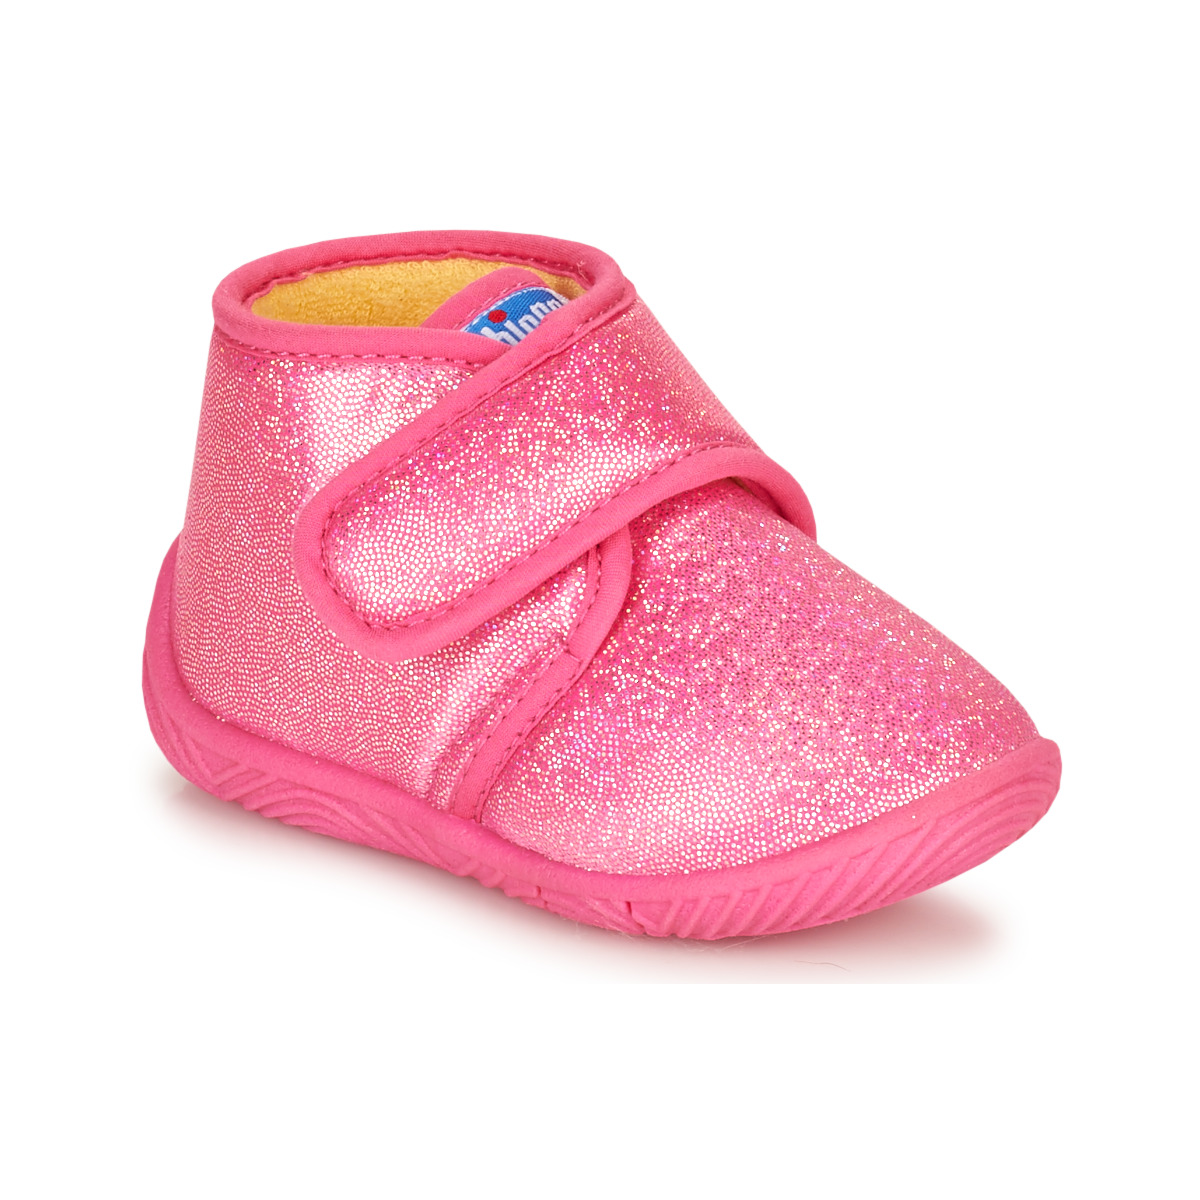 Chicco Rose TAXO 8SOt9Tl2